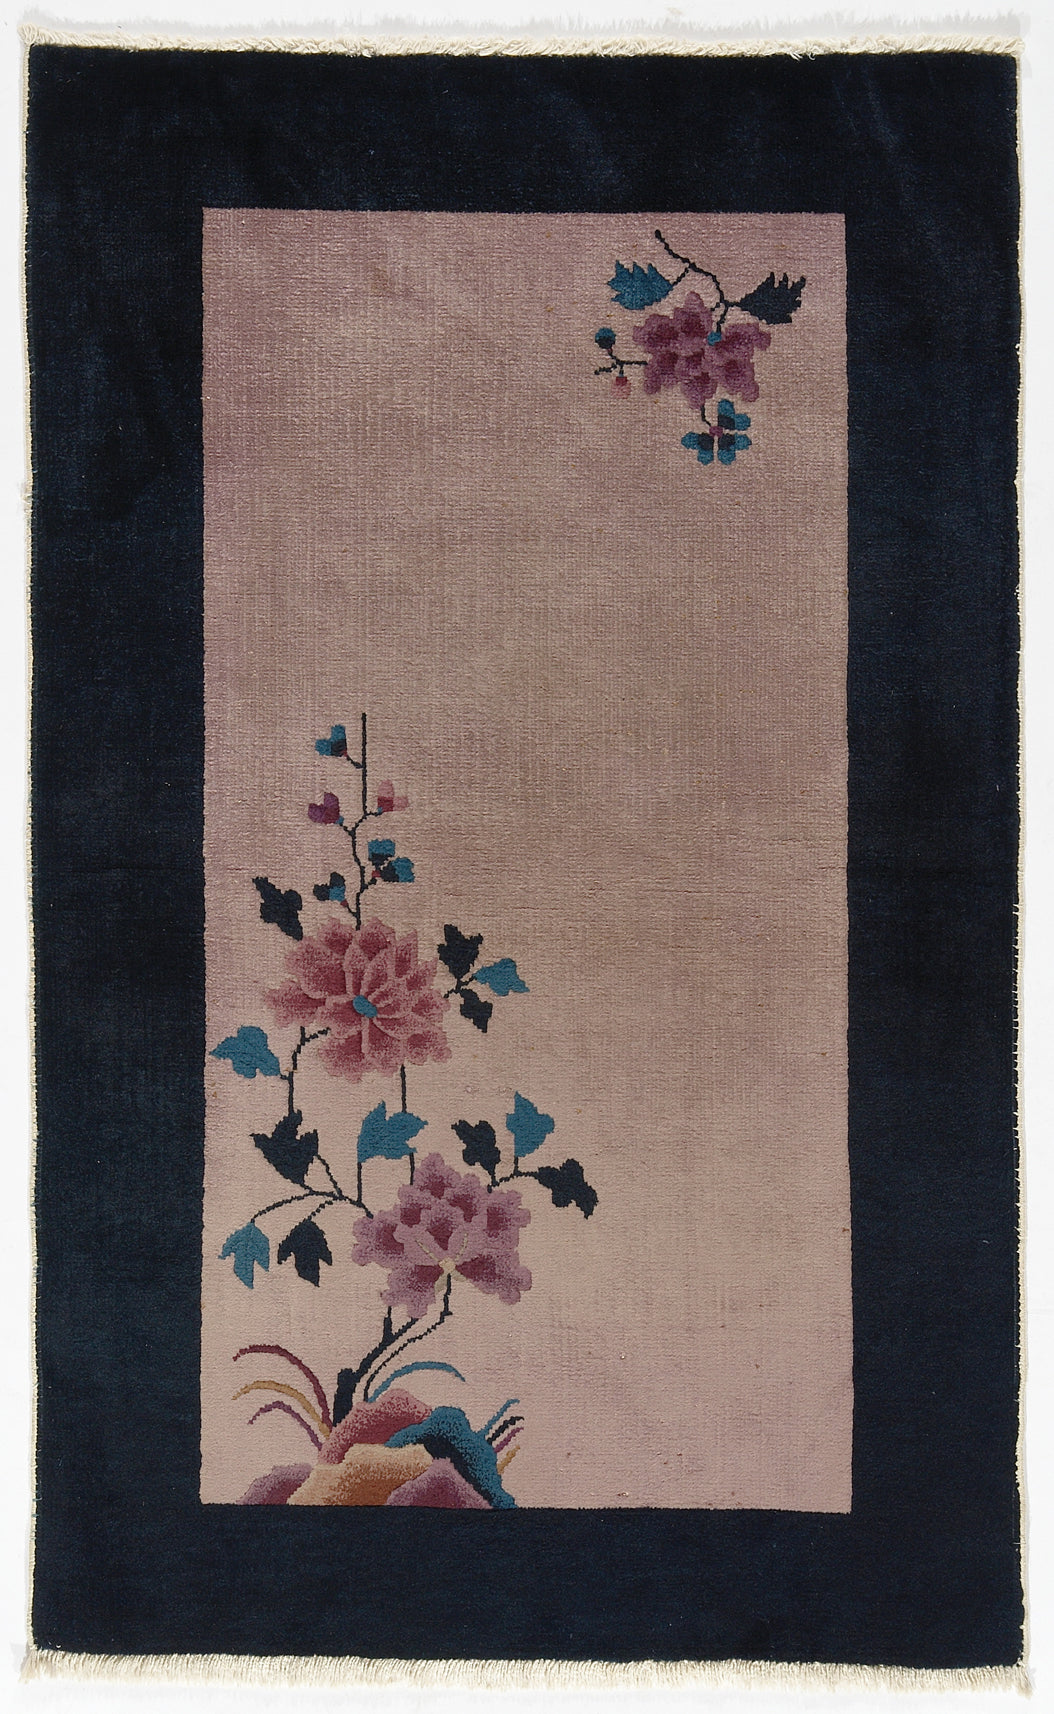 3'x5' Black and Mauve Floral Chinese Art Deco Rug